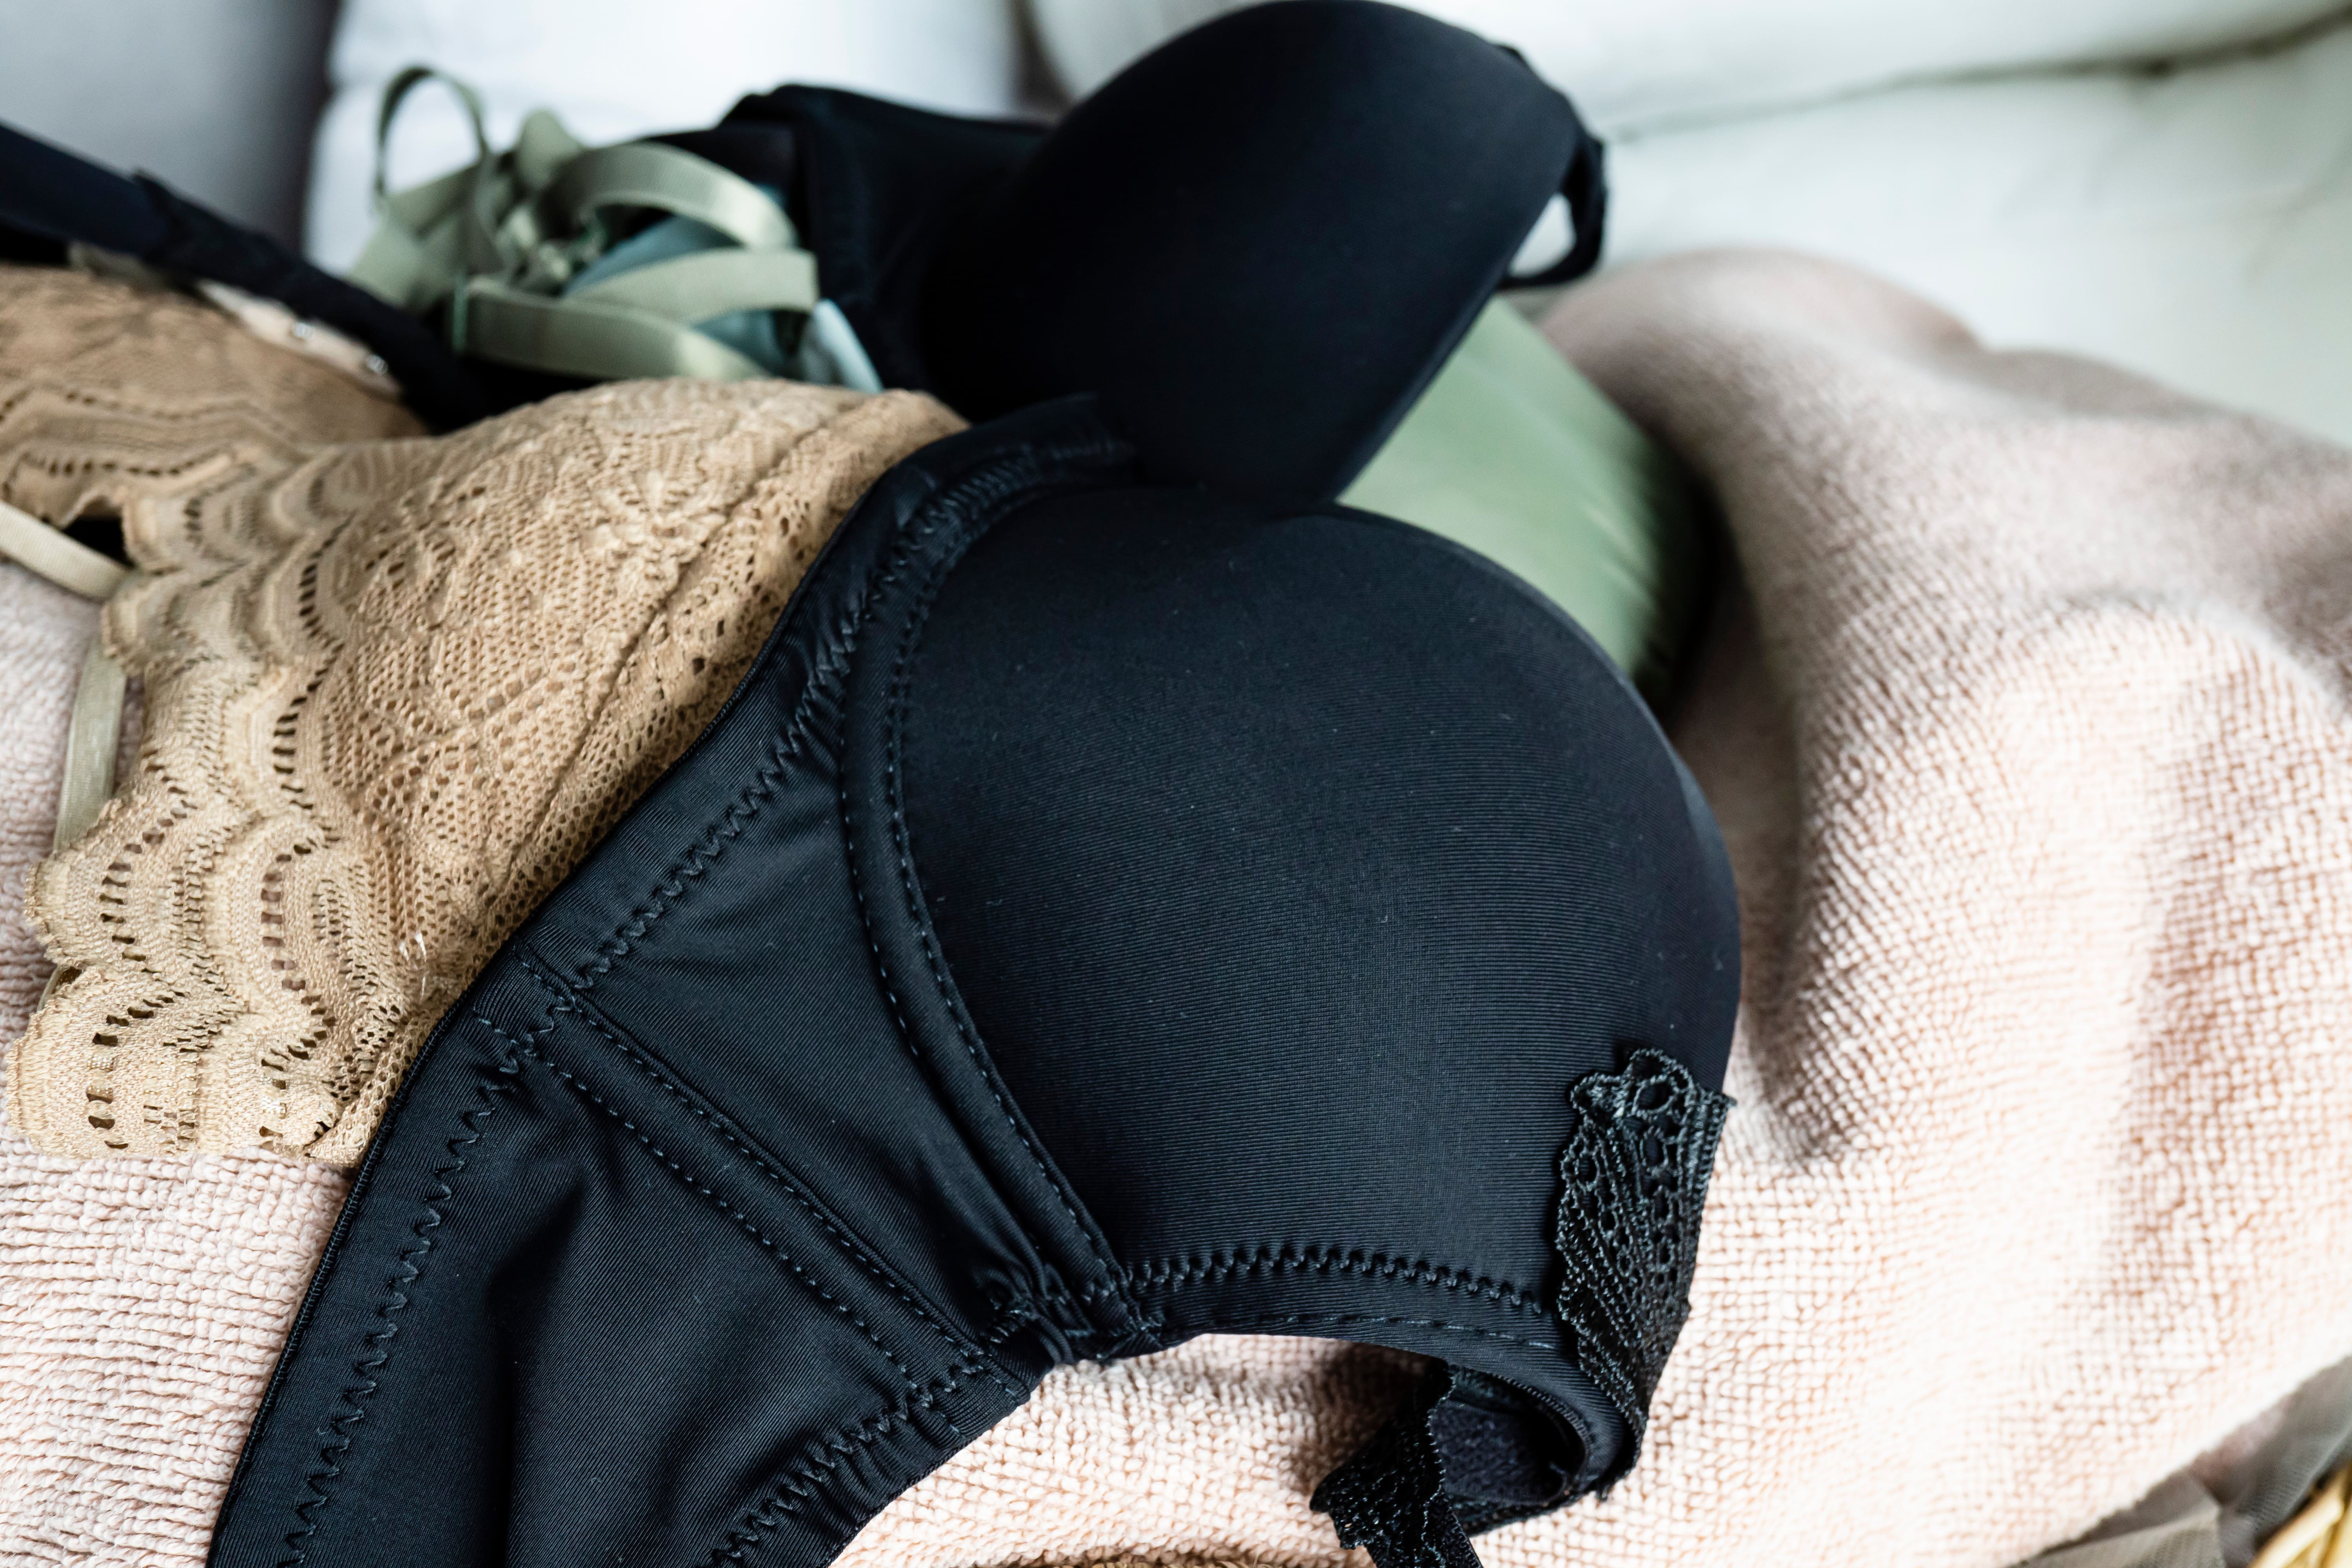 A nude bra, a black one, and a sage green bra piled up on a beige towel